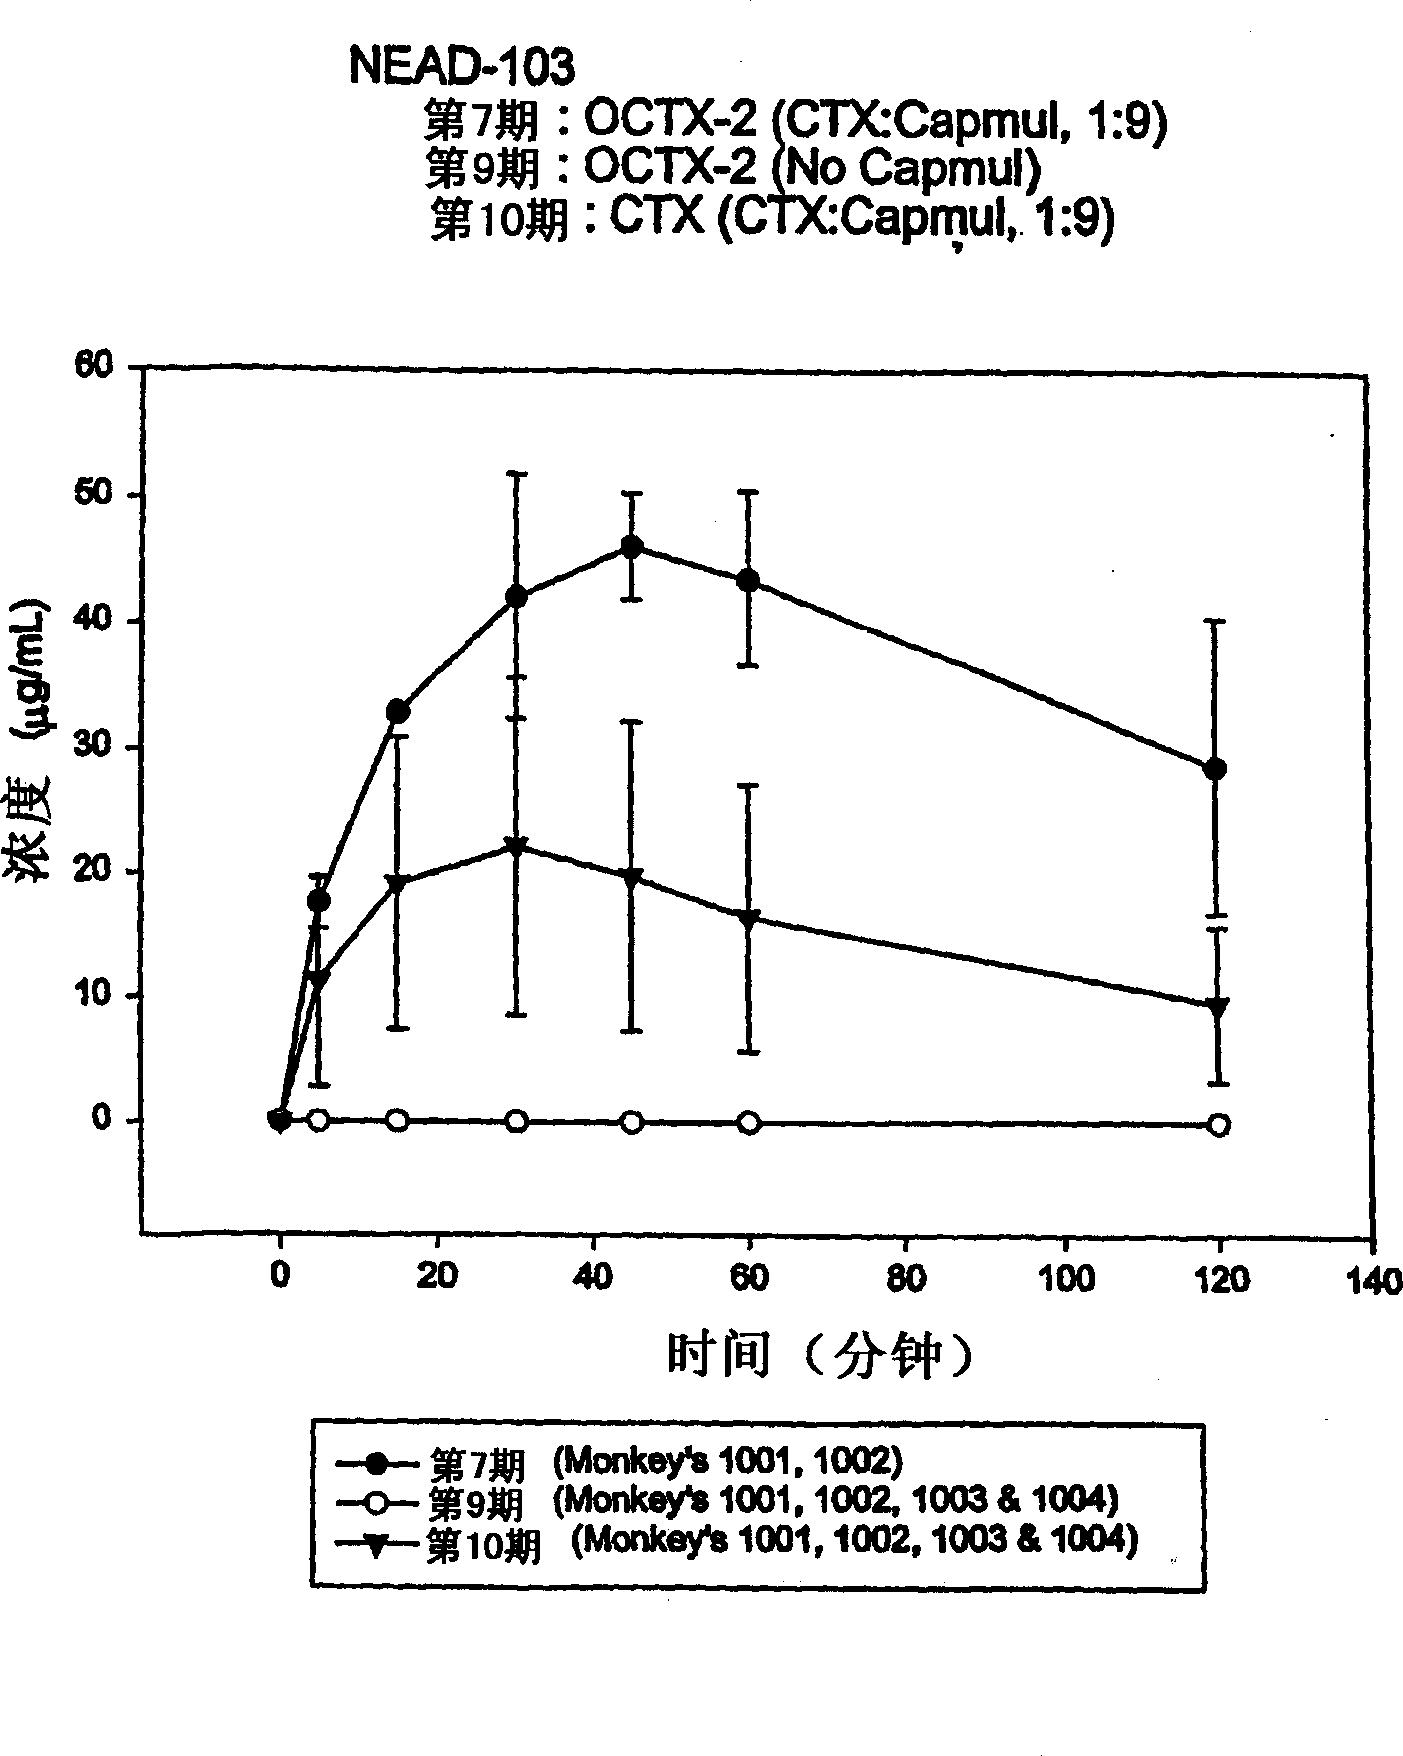 Compositions and methods to improve oral absorption of antimicrobial agents